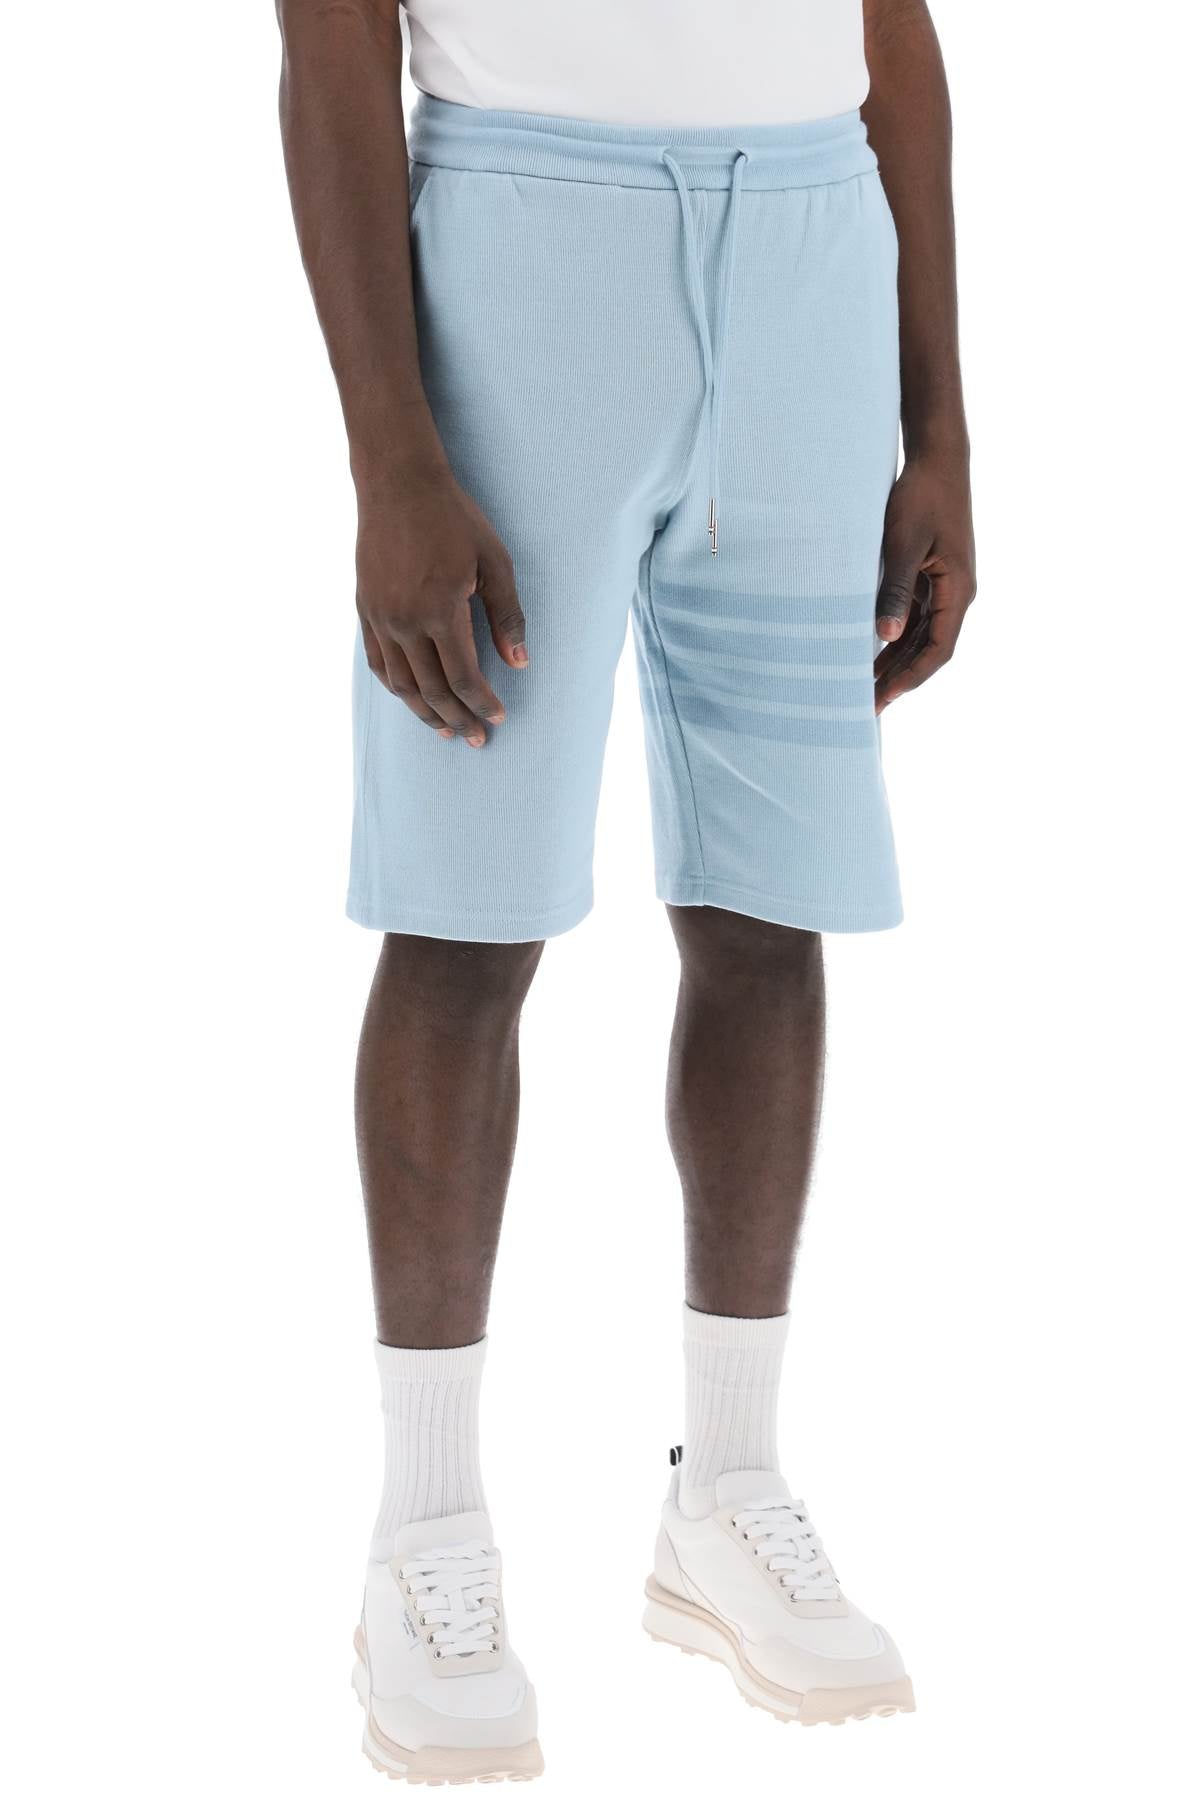 Thom browne 4-bar shorts in cotton knit-1